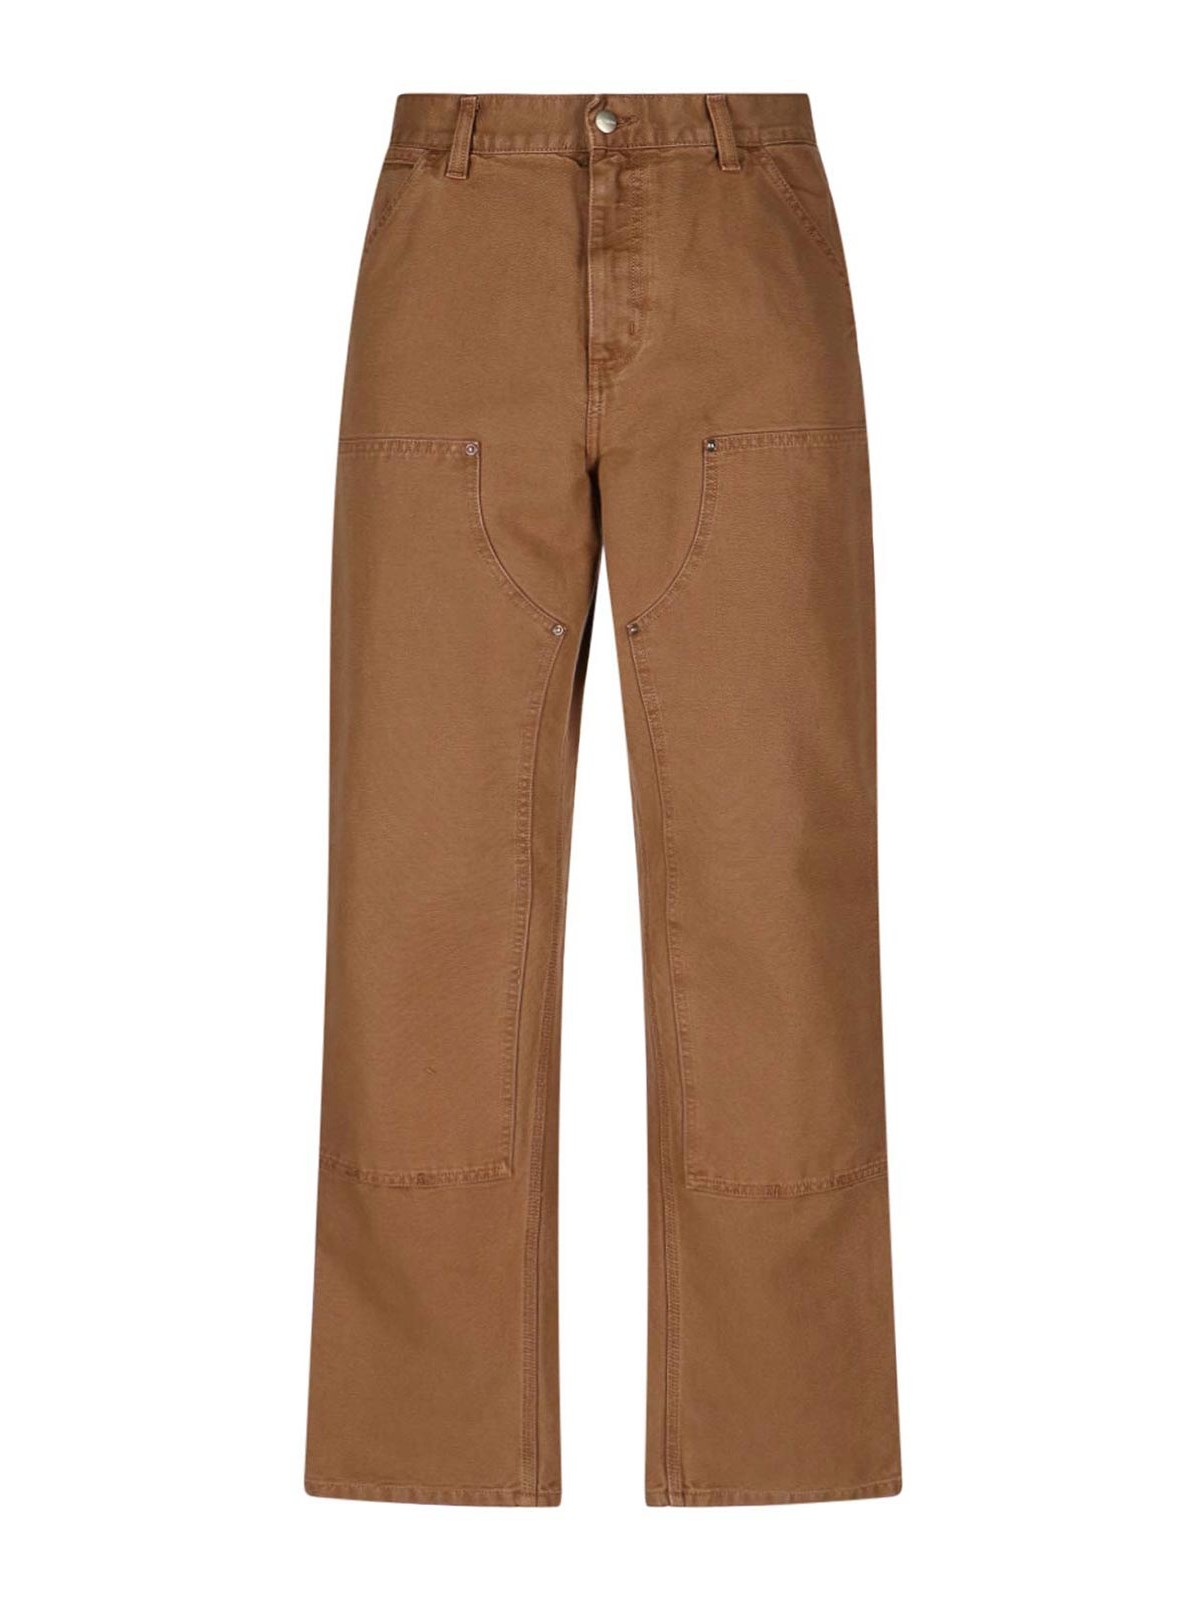 Carhartt Trousers In Brown